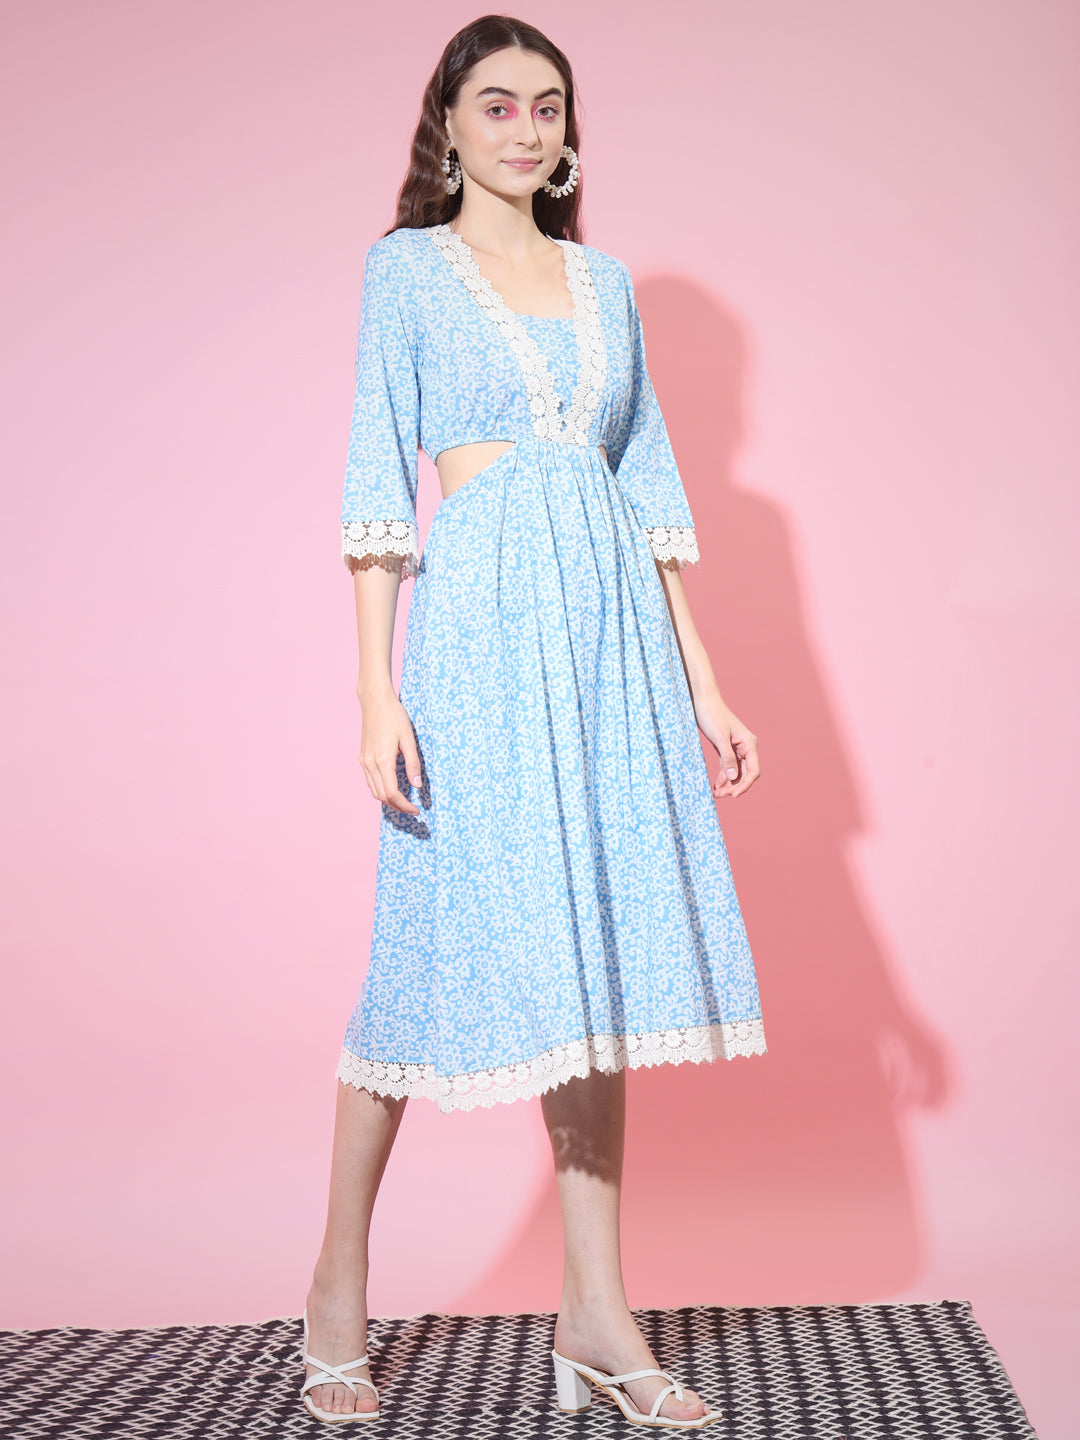 Women's Blue Floral Printed Fit And Flare Dress - Myshka